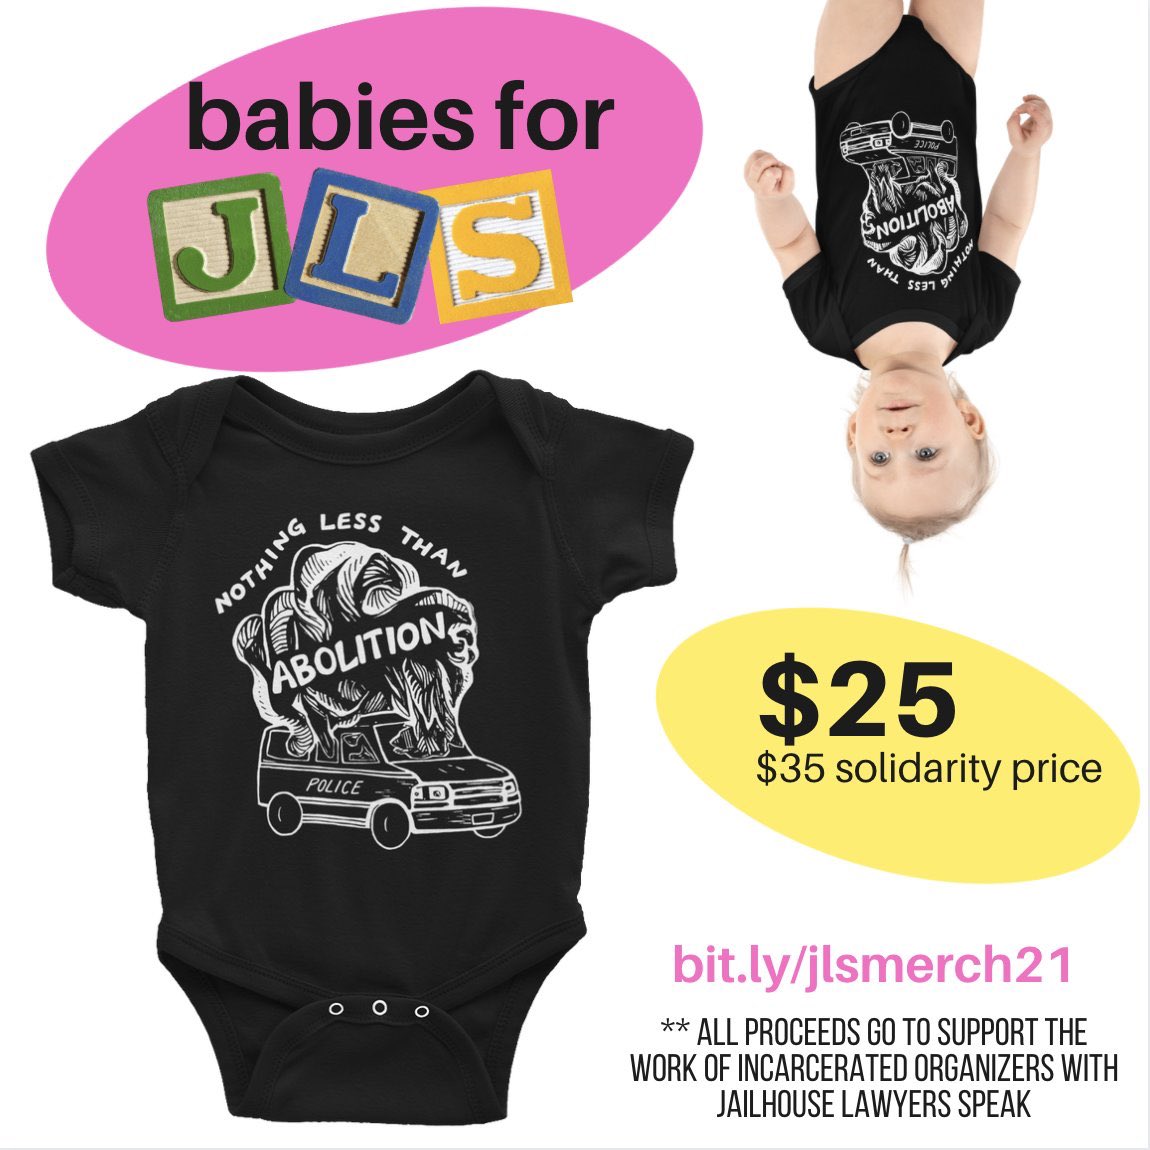 👶🔥 we have baby merch! 👶🔥 when you buy a onesie for the abolitionist babies in your life 100% of the profits go directly to support the organizing of incarcerated human rights and legal advocates with Jailhouse Lawyers Speak (@JailLawSpeak) bit.ly/jlsmerch21